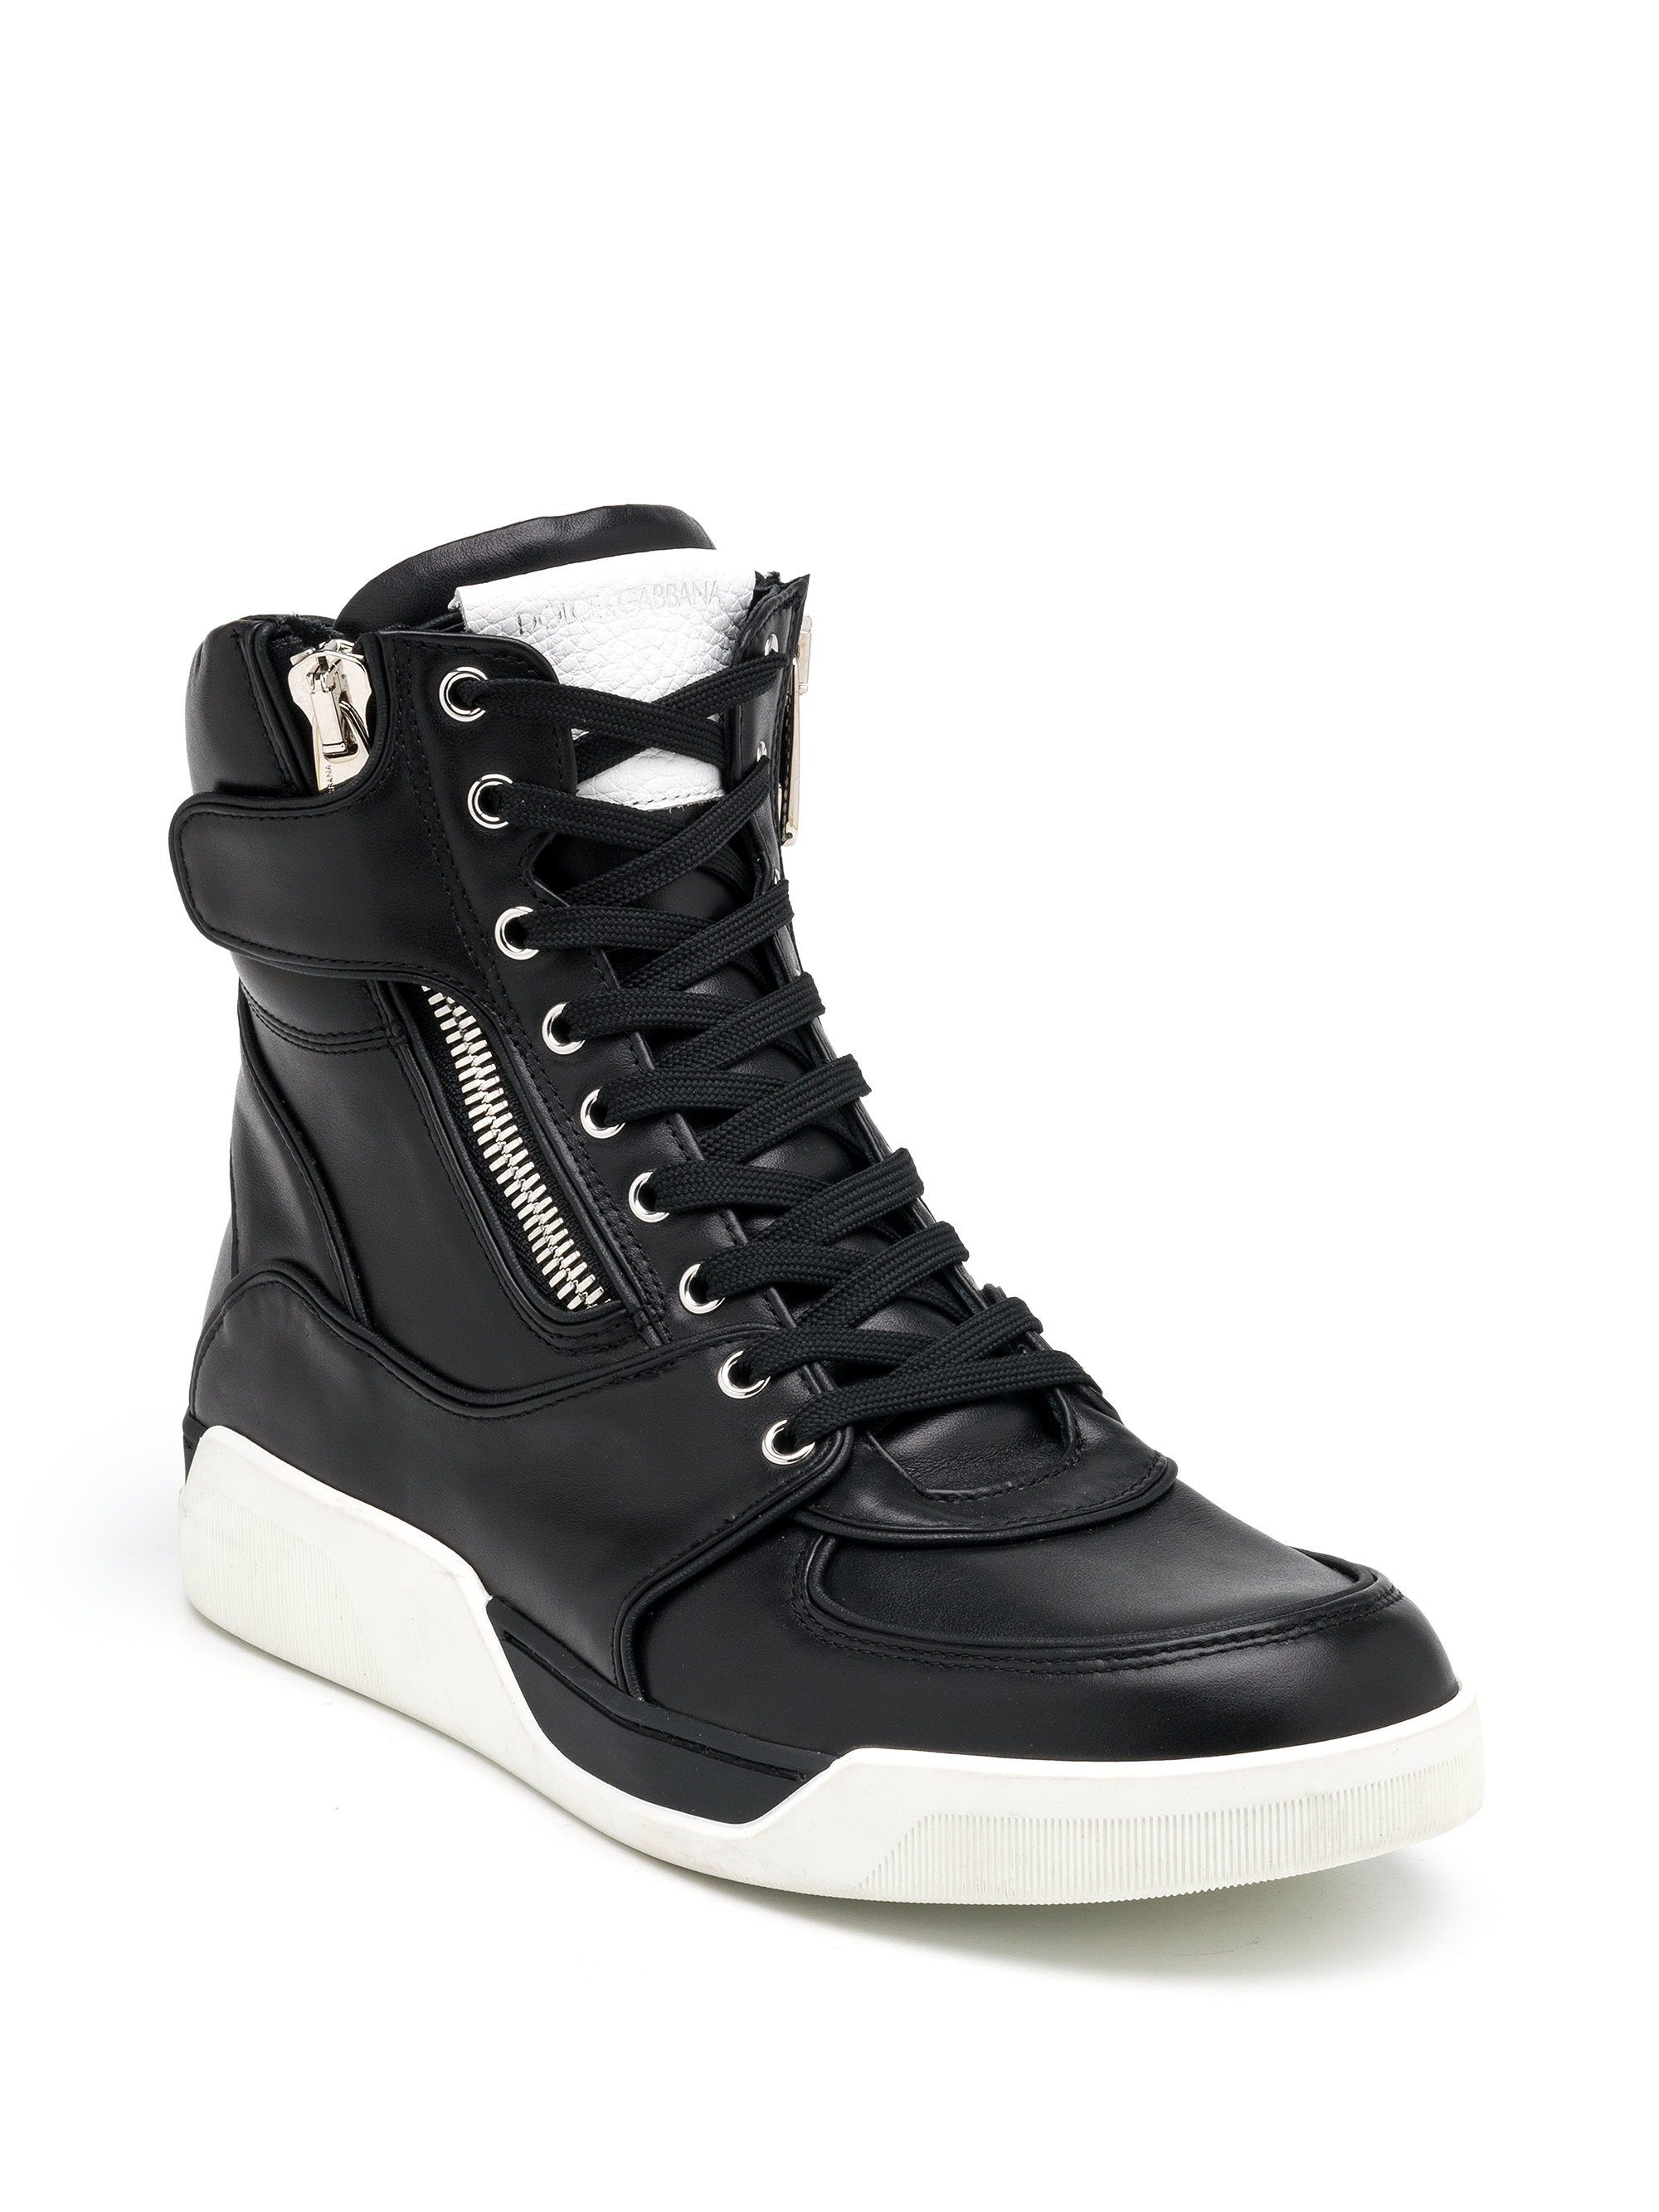 Dolce & gabbana Side-zip High-top Leather Sneakers in Black for Men | Lyst